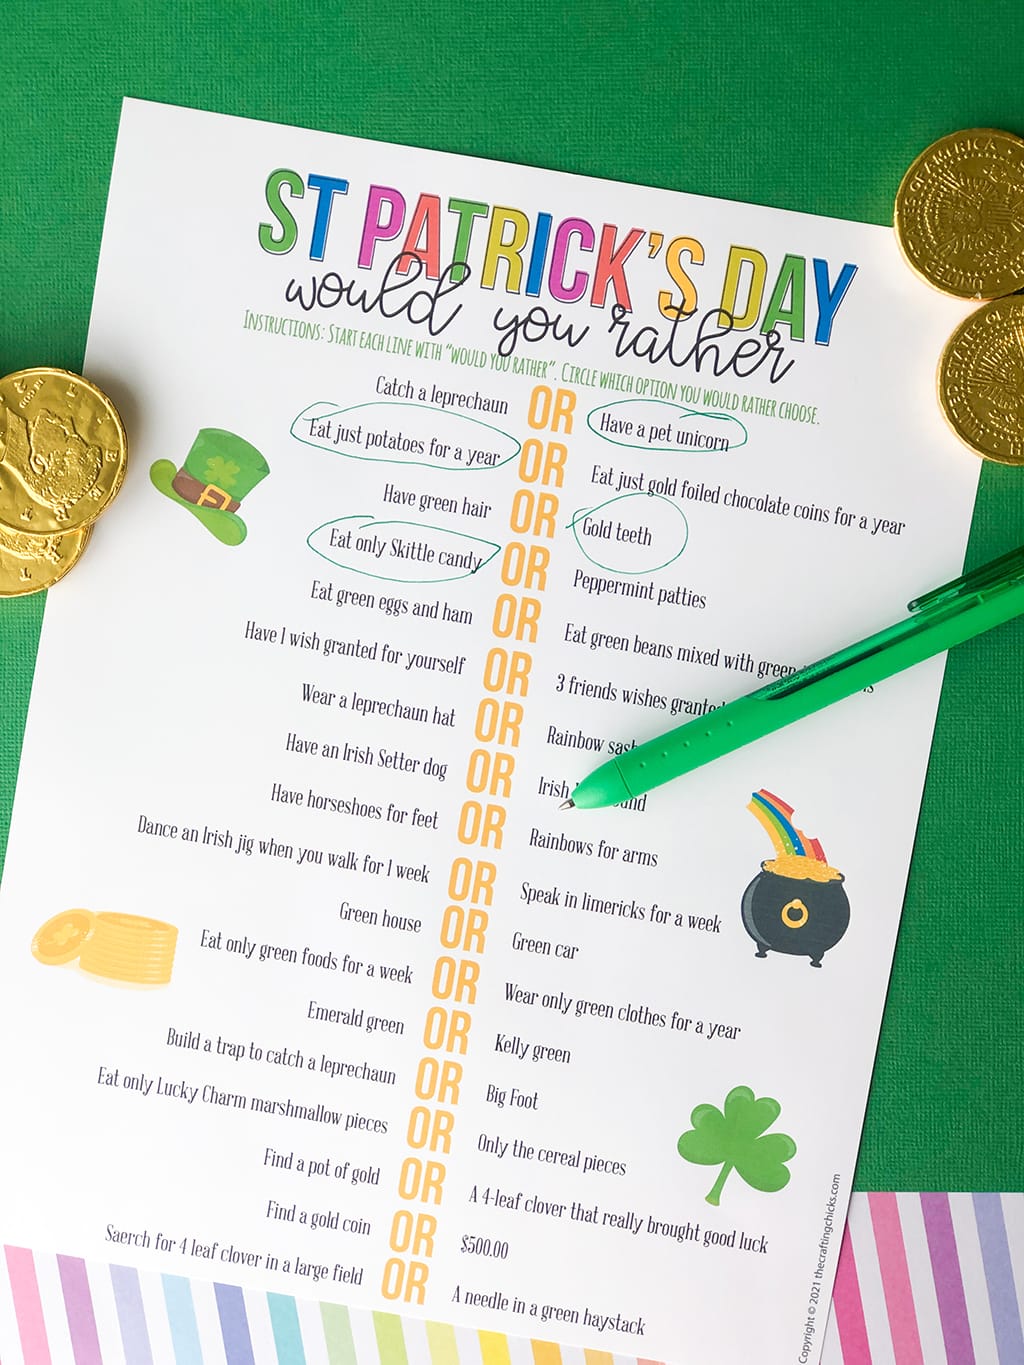 St. Patrick's Day Would You Rather on a rainbow colored, and a green paper background with gold coins around.